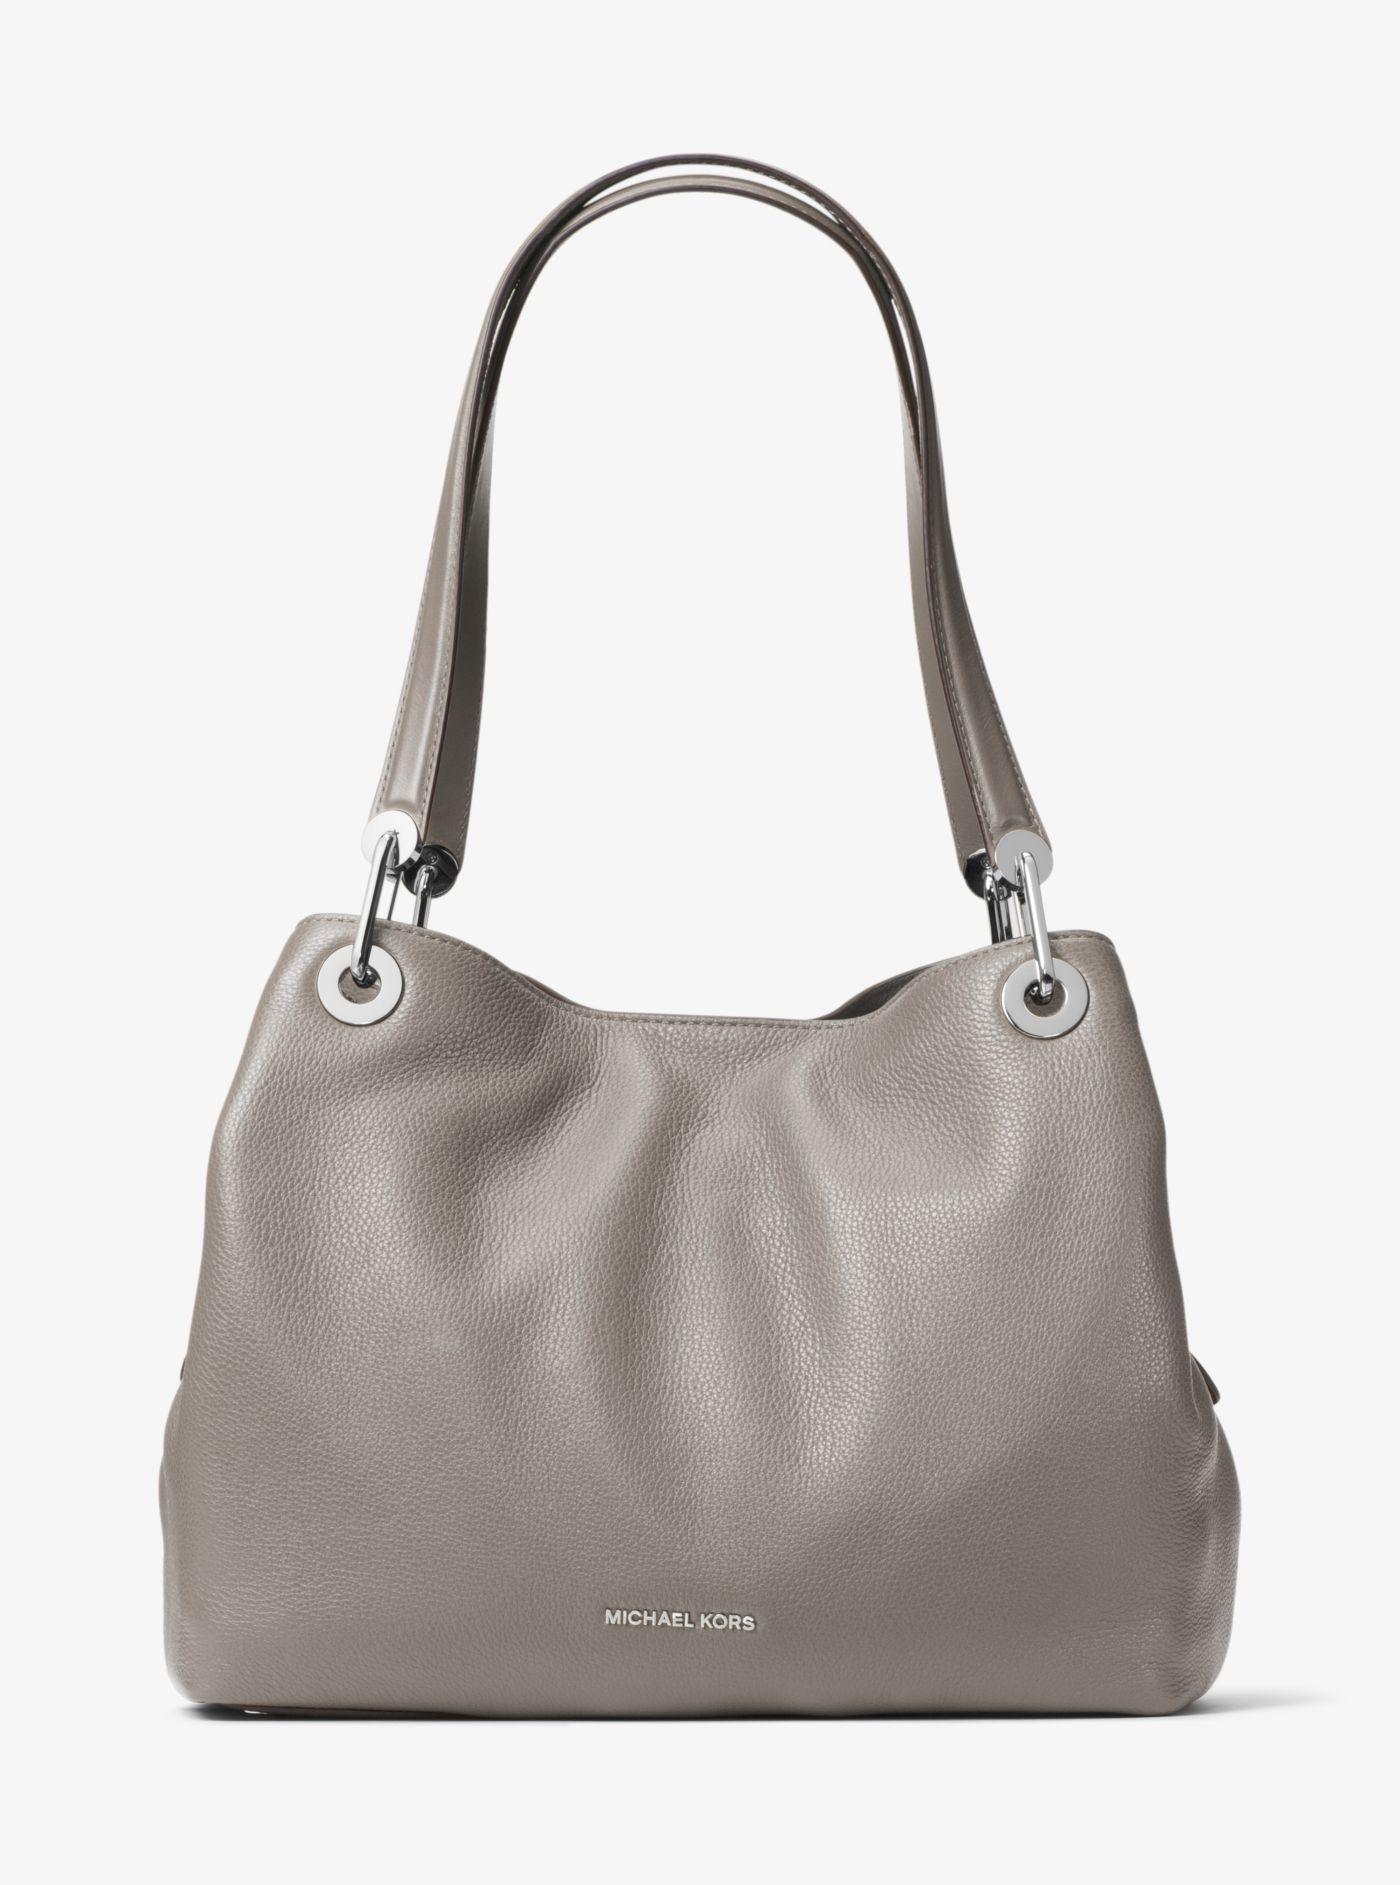 Michael Kors Leather Raven Large Shoulder Tote Pearl Grey in Gray ...